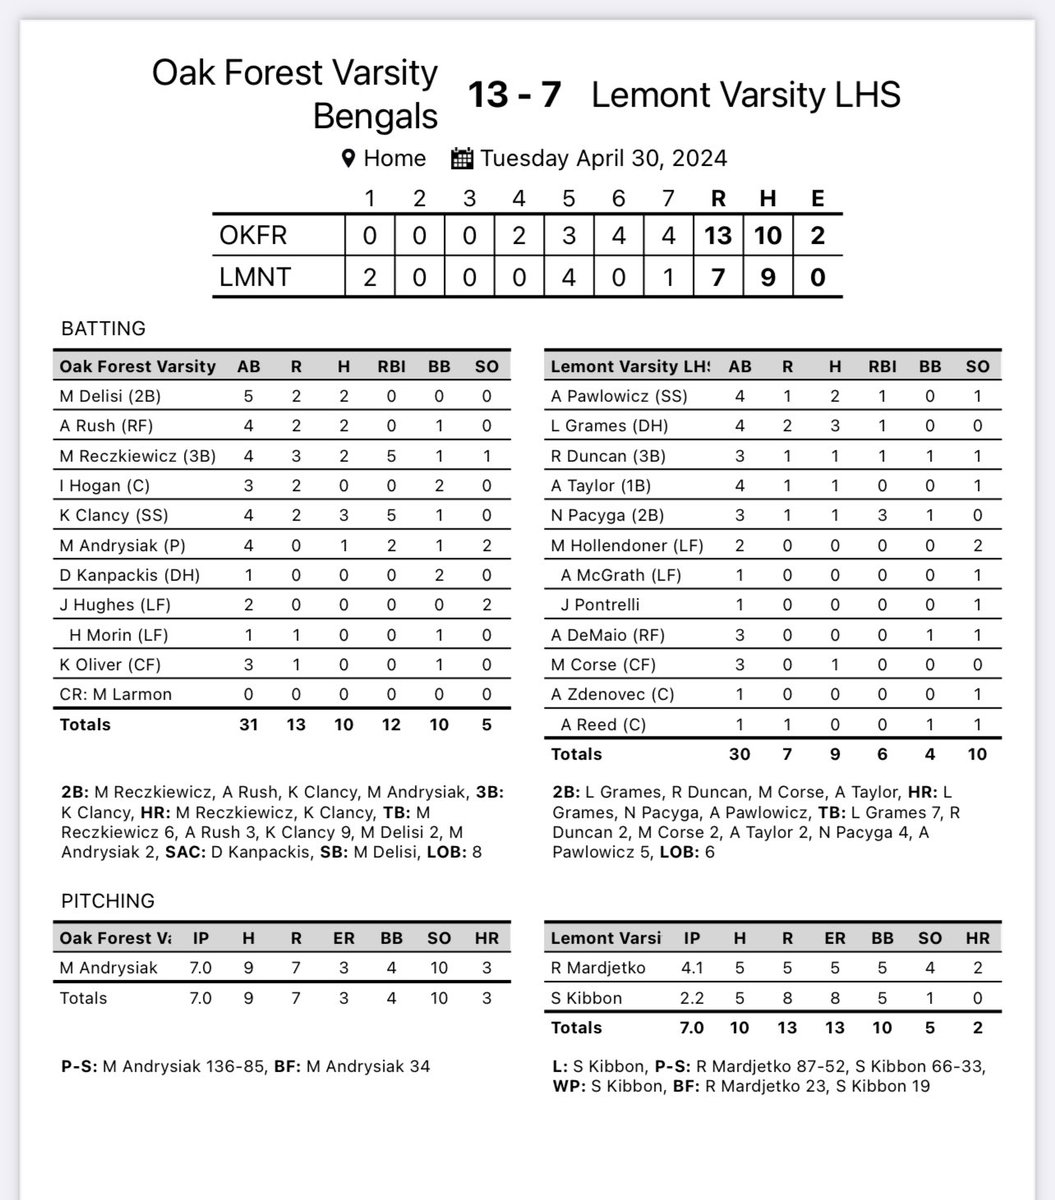 Dropped a tough one today. Gotta play complete solid games to win. On a high note we kept battling and @allipawlowicz25 @LaurenGrames2 @NataliePacyga all went yard.